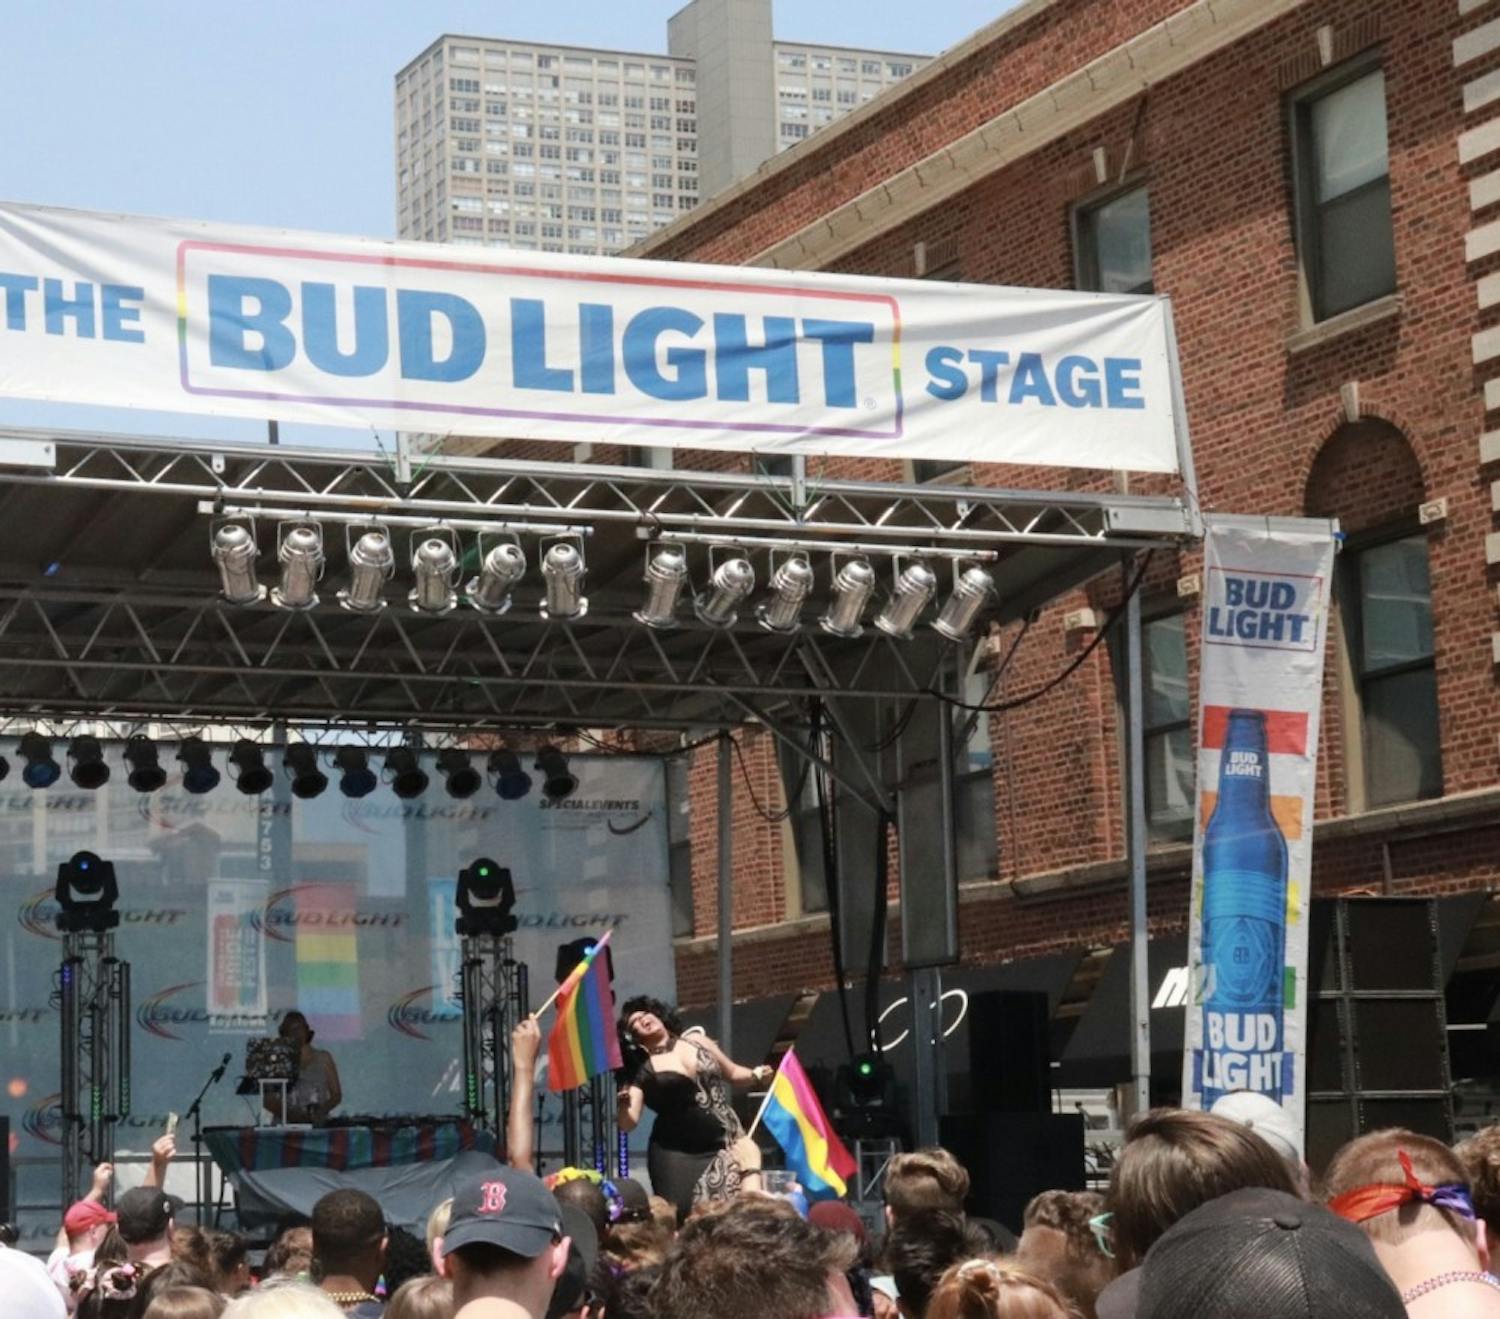 Pride Fest is celebrated in Chicago